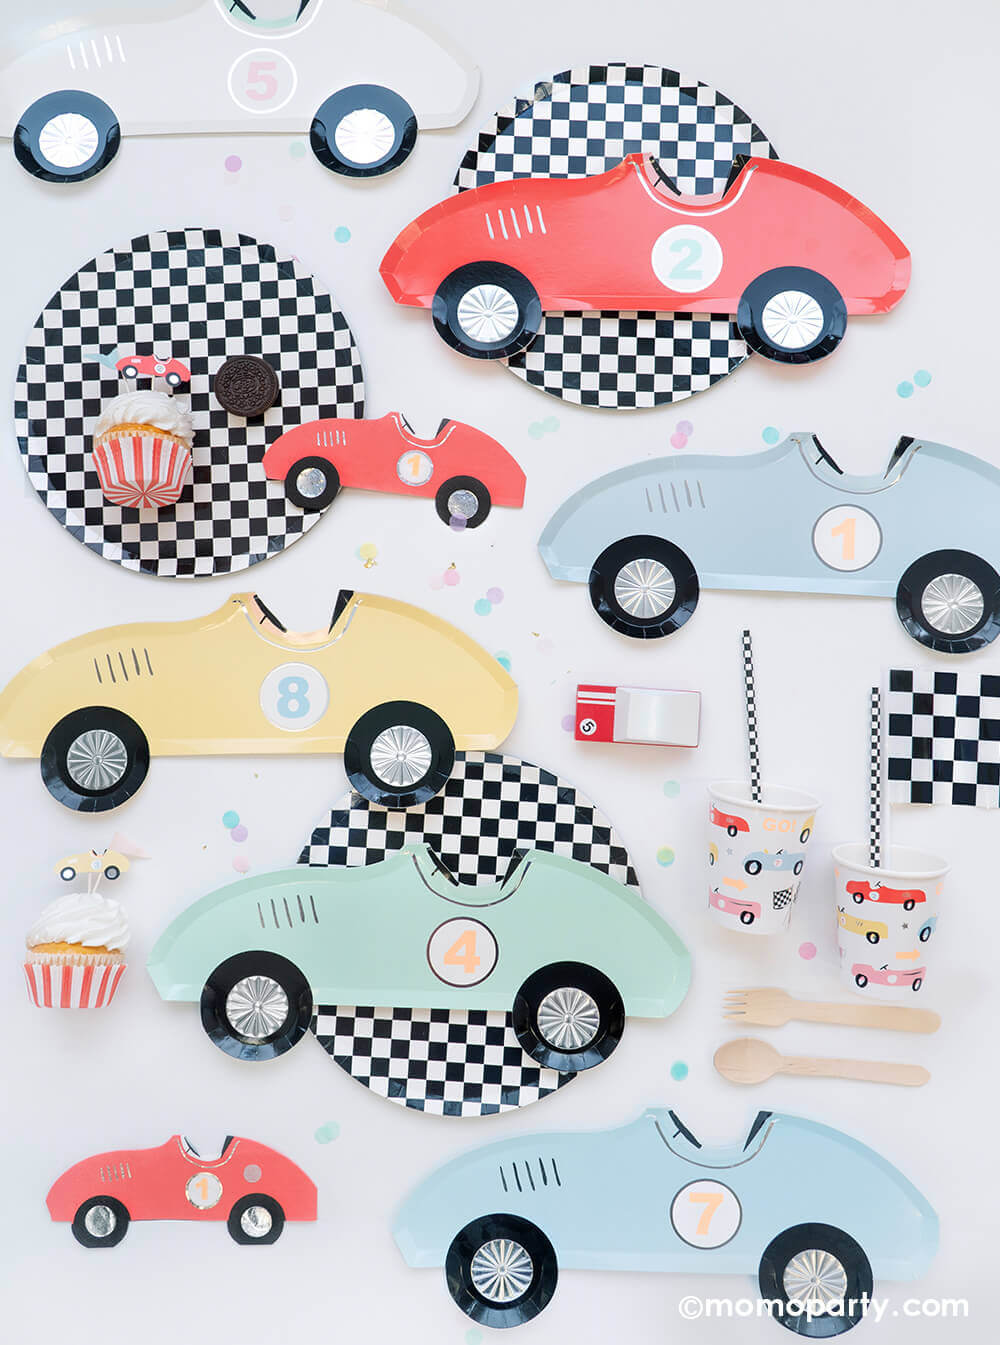 Momo Party's Race Car Party Collection featuring Meri Meri's vintage race car papery plates in 8 different colors, red race car shaped napkins, round checkered dinner plates, race car motif party cups, checkered flags decorations, race car cupcake kit and toppers and Candylab wooden toy race car - perfect for kid's "Two Fast" race car themed second birthday party or "Fast One" first birthday party.